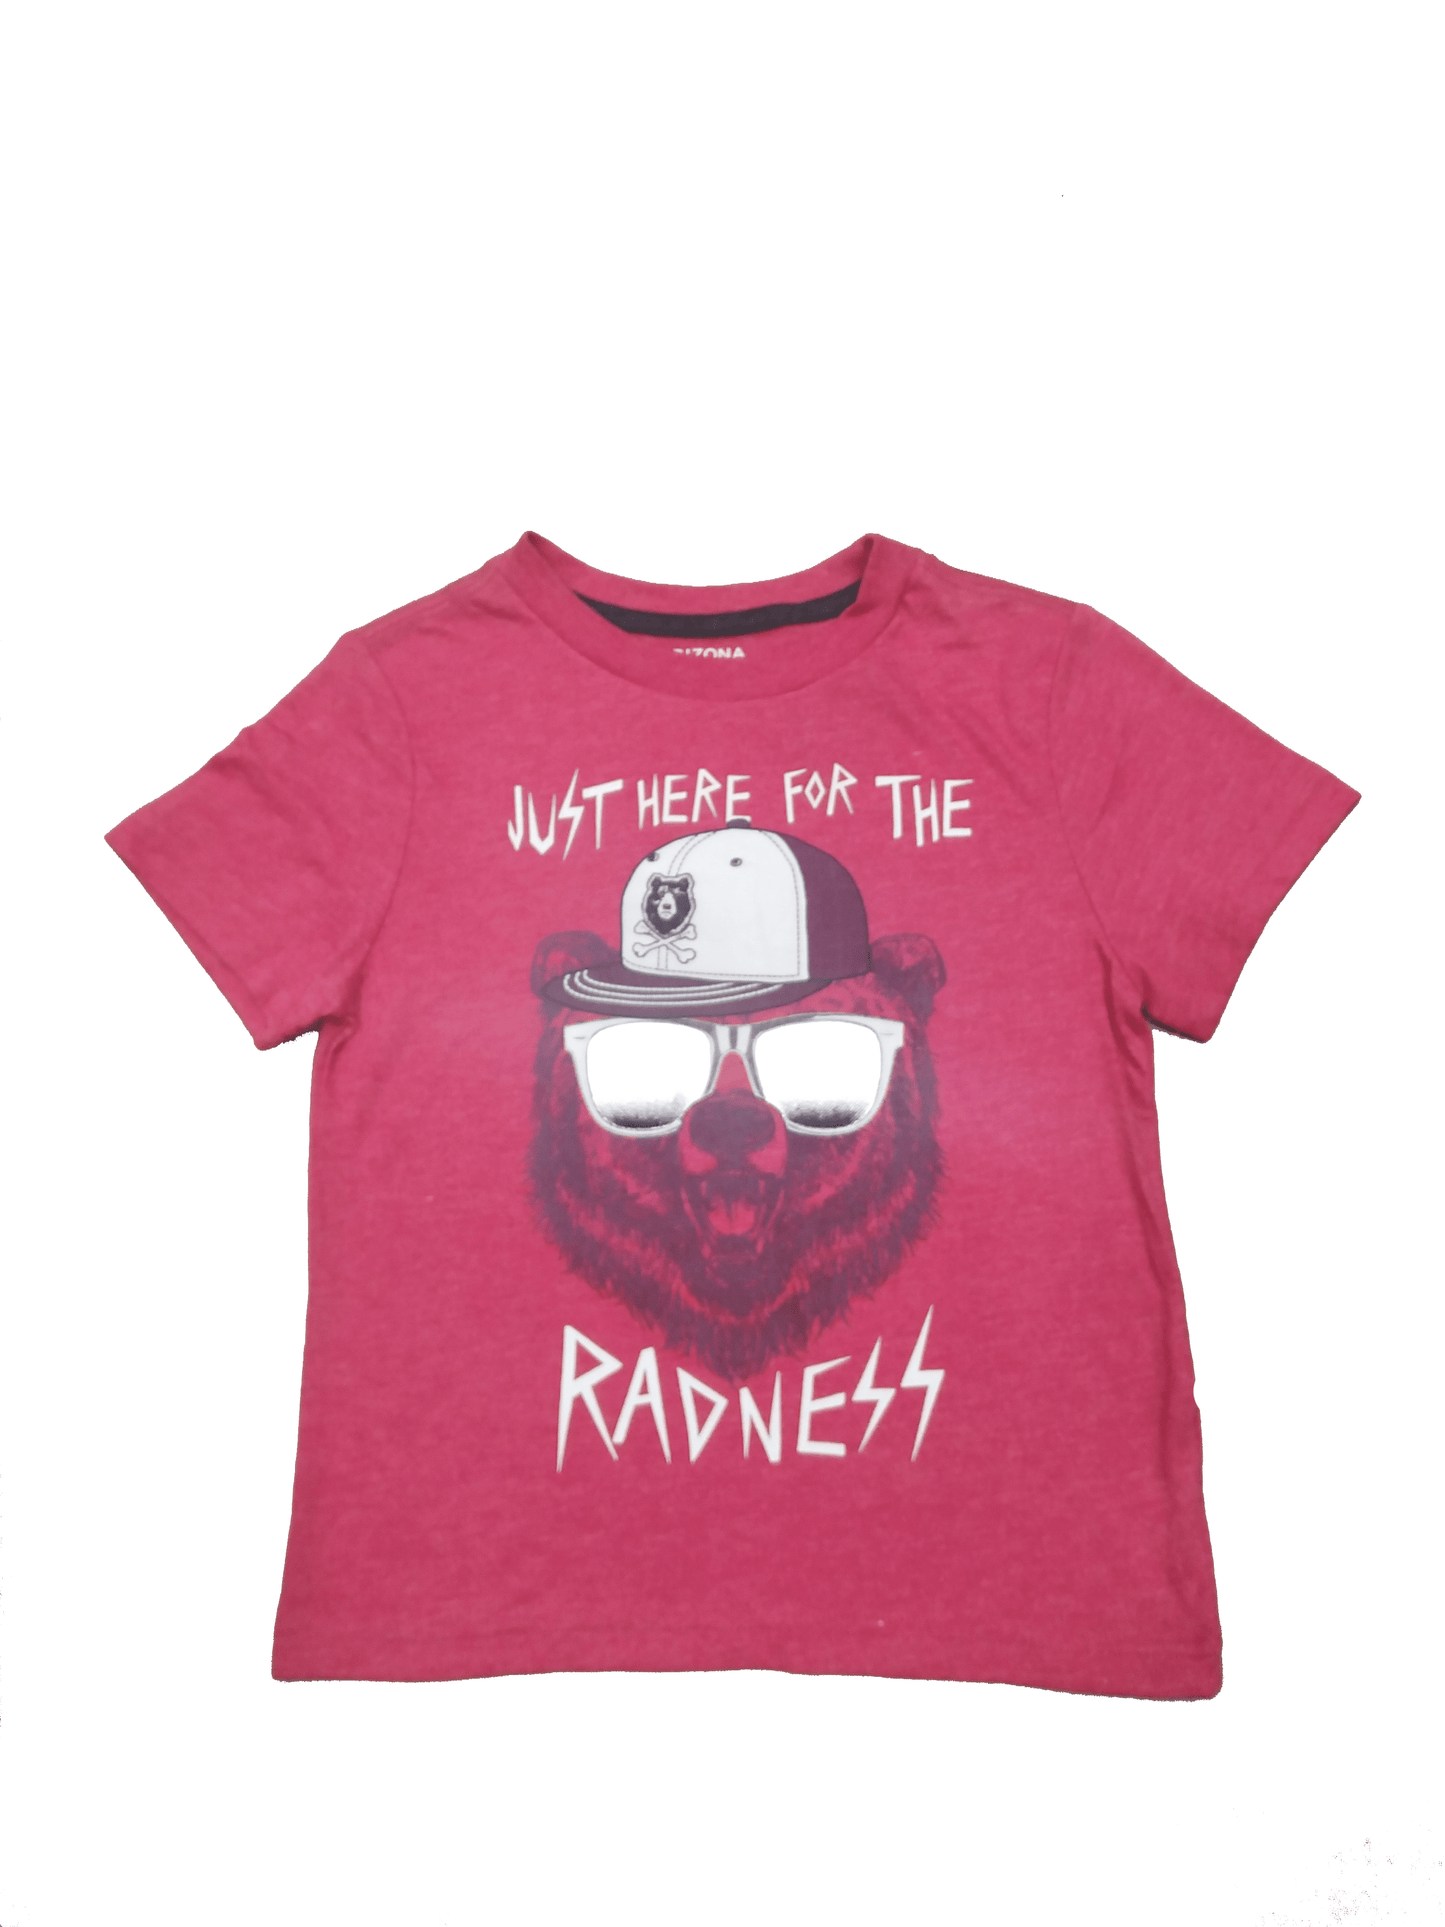 Arizona Apparel 4-5 Years Kids - Just Here For The Redness T-Shirt